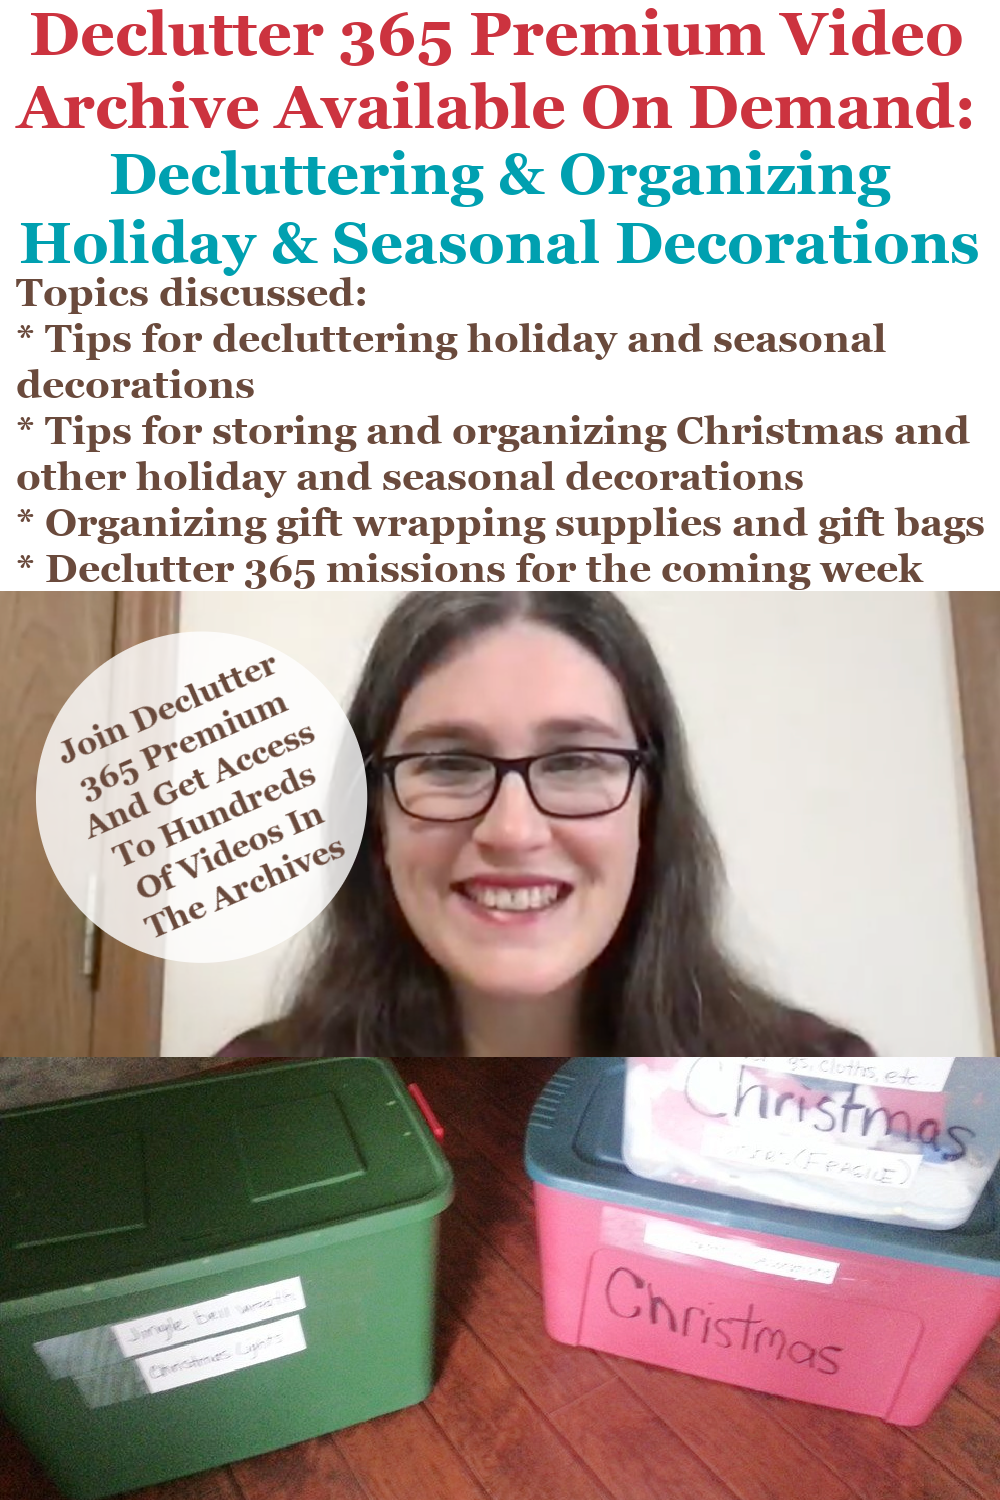 Declutter 365 Premium video archive available on demand all about decluttering and organizing holiday decorations, on Home Storage Solutions 101